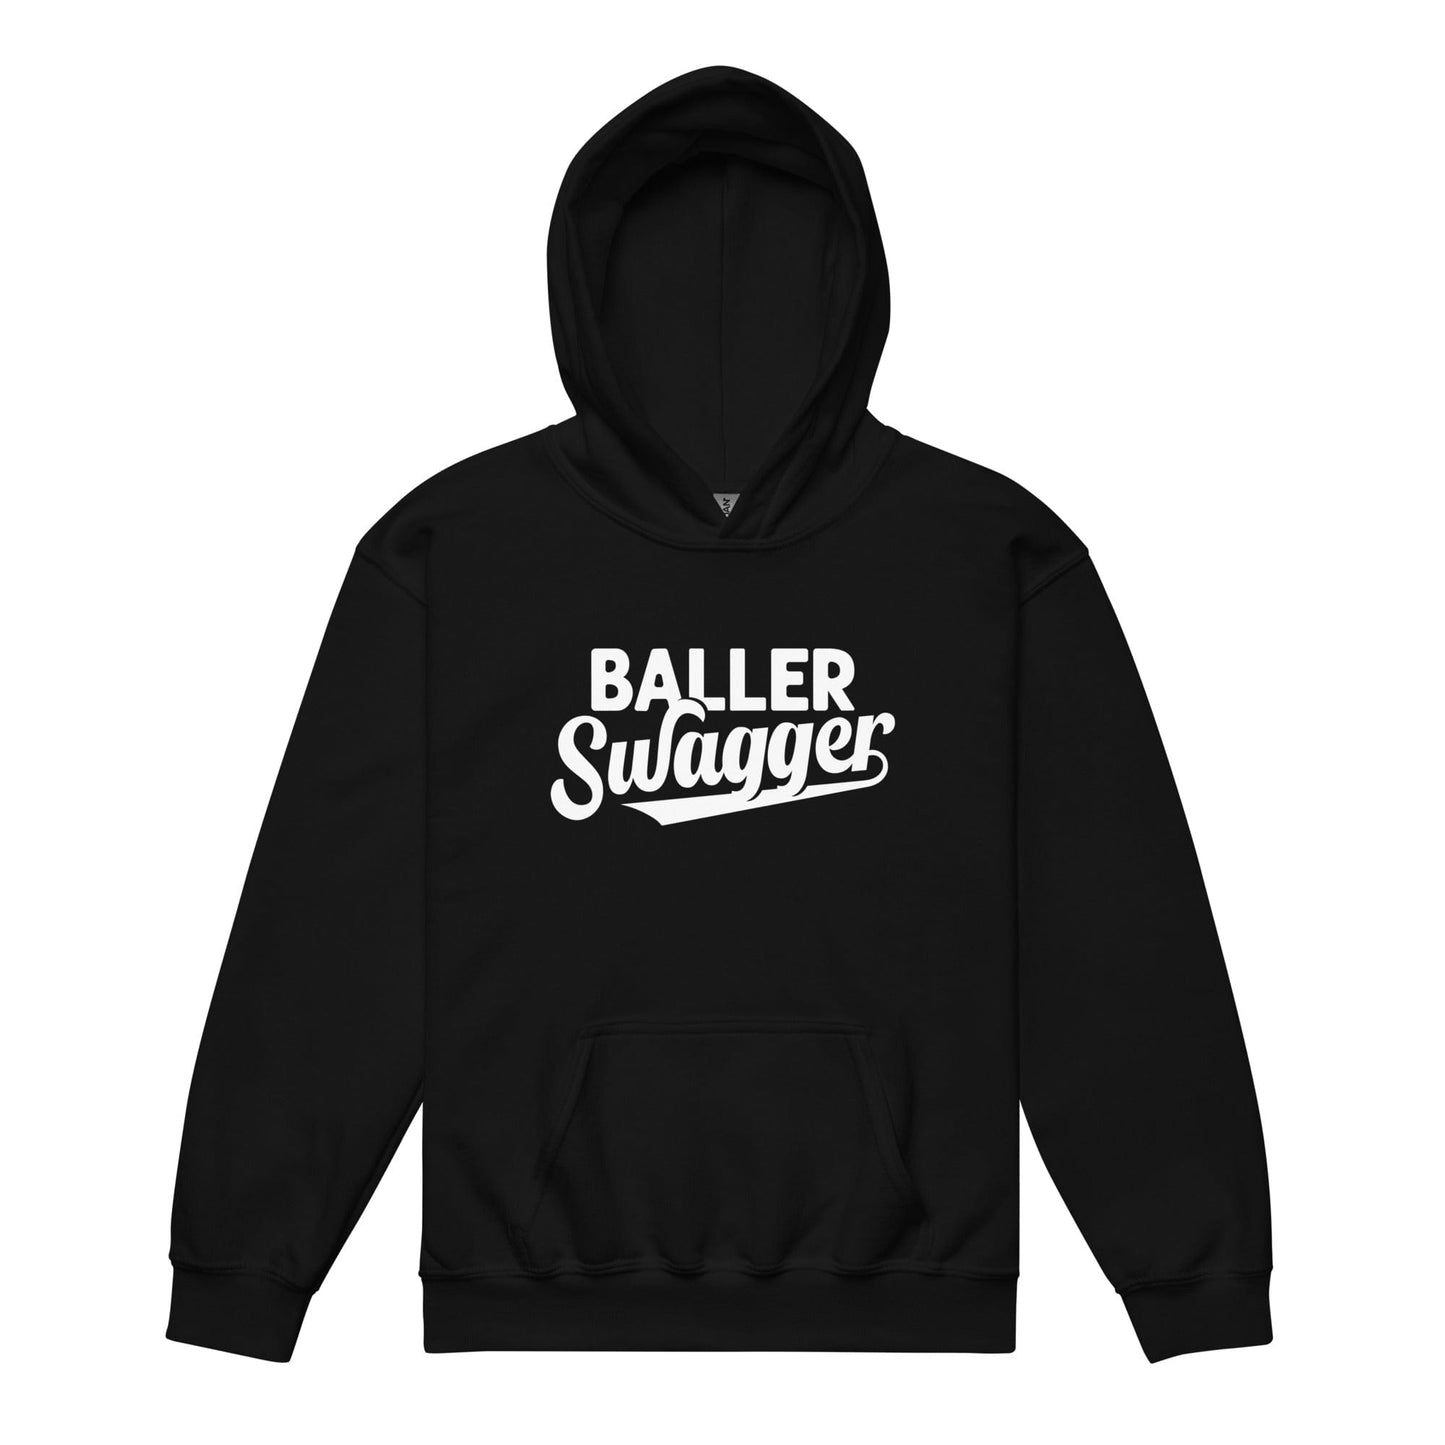 Baller Swagger - Youth Hoodie